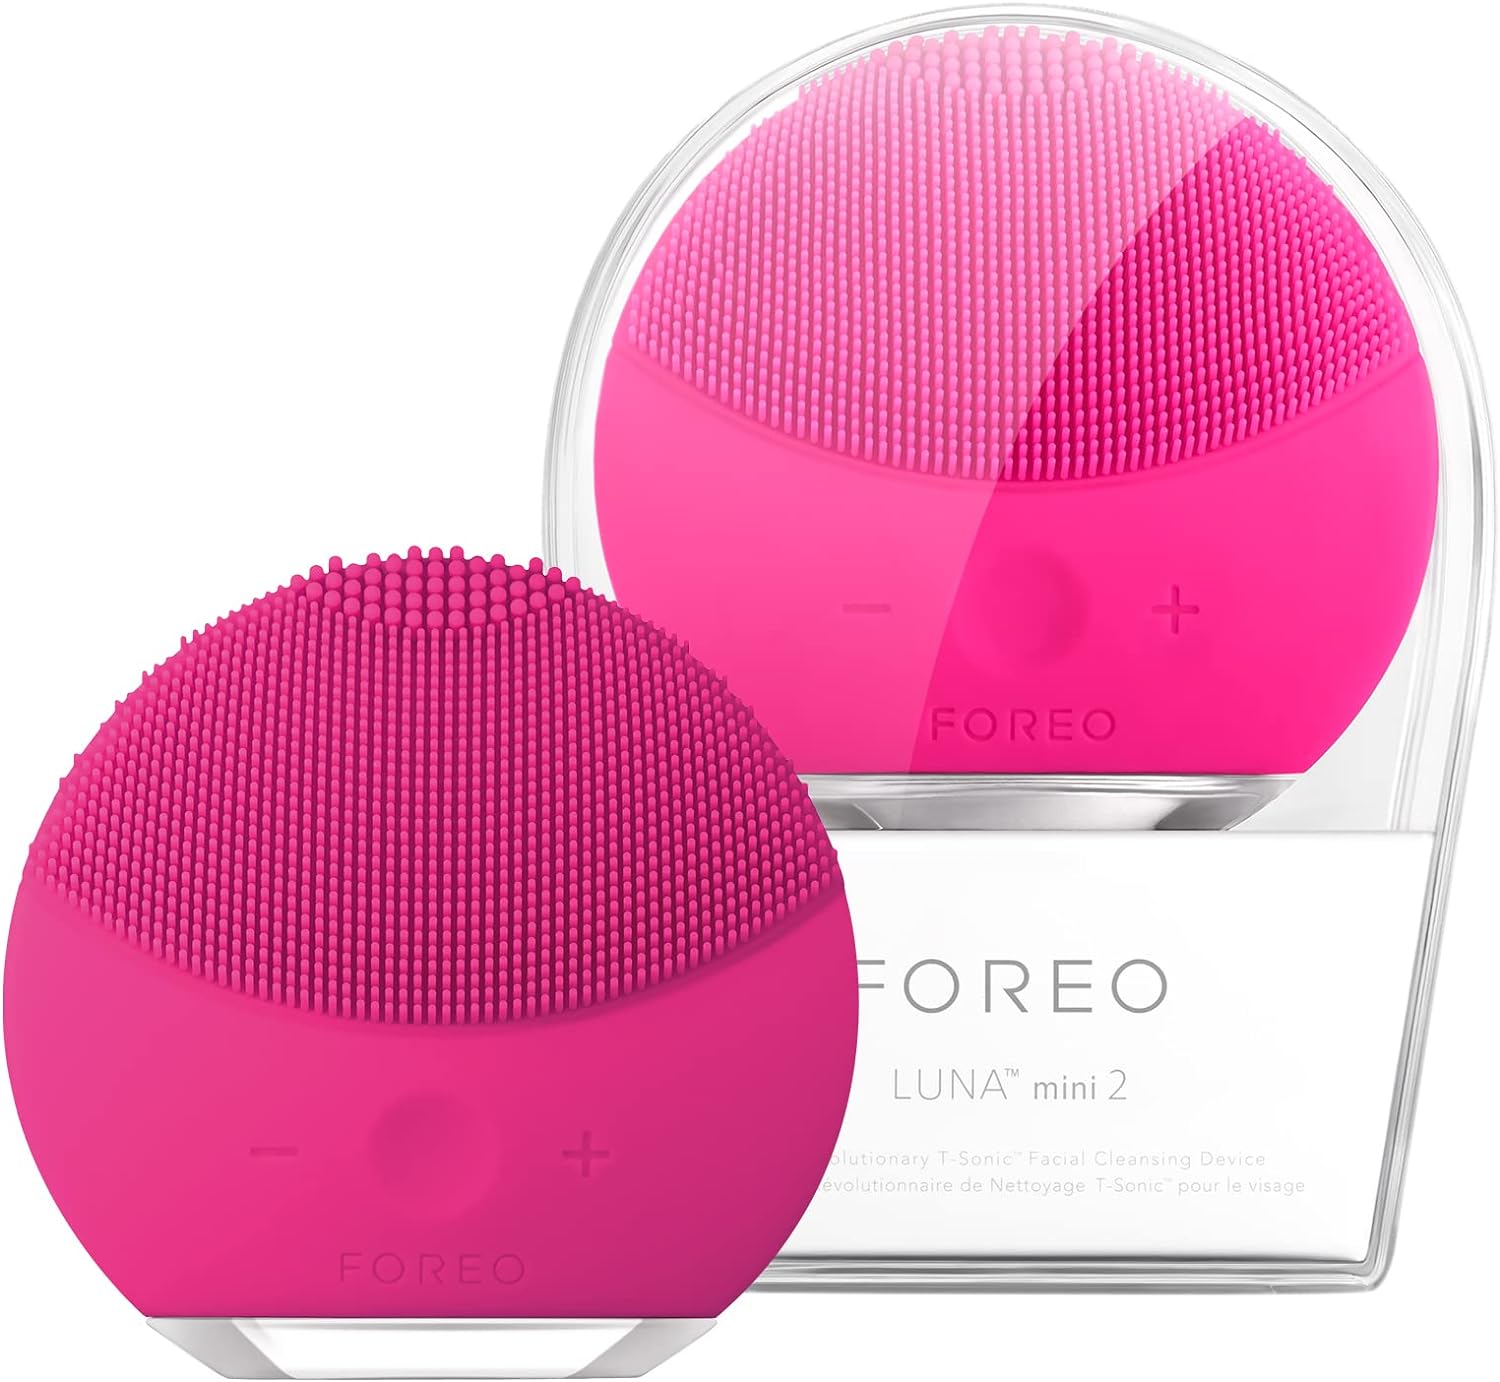 FOREO LUNA mini 2 Fuchsia Silicone Facial Cleansing Brush for All Skin Types, 3-zone Brush Head, Ultra-hygienic, T-Sonic Massage, 8 Intensities, 300 uses/Charge, Waterproof